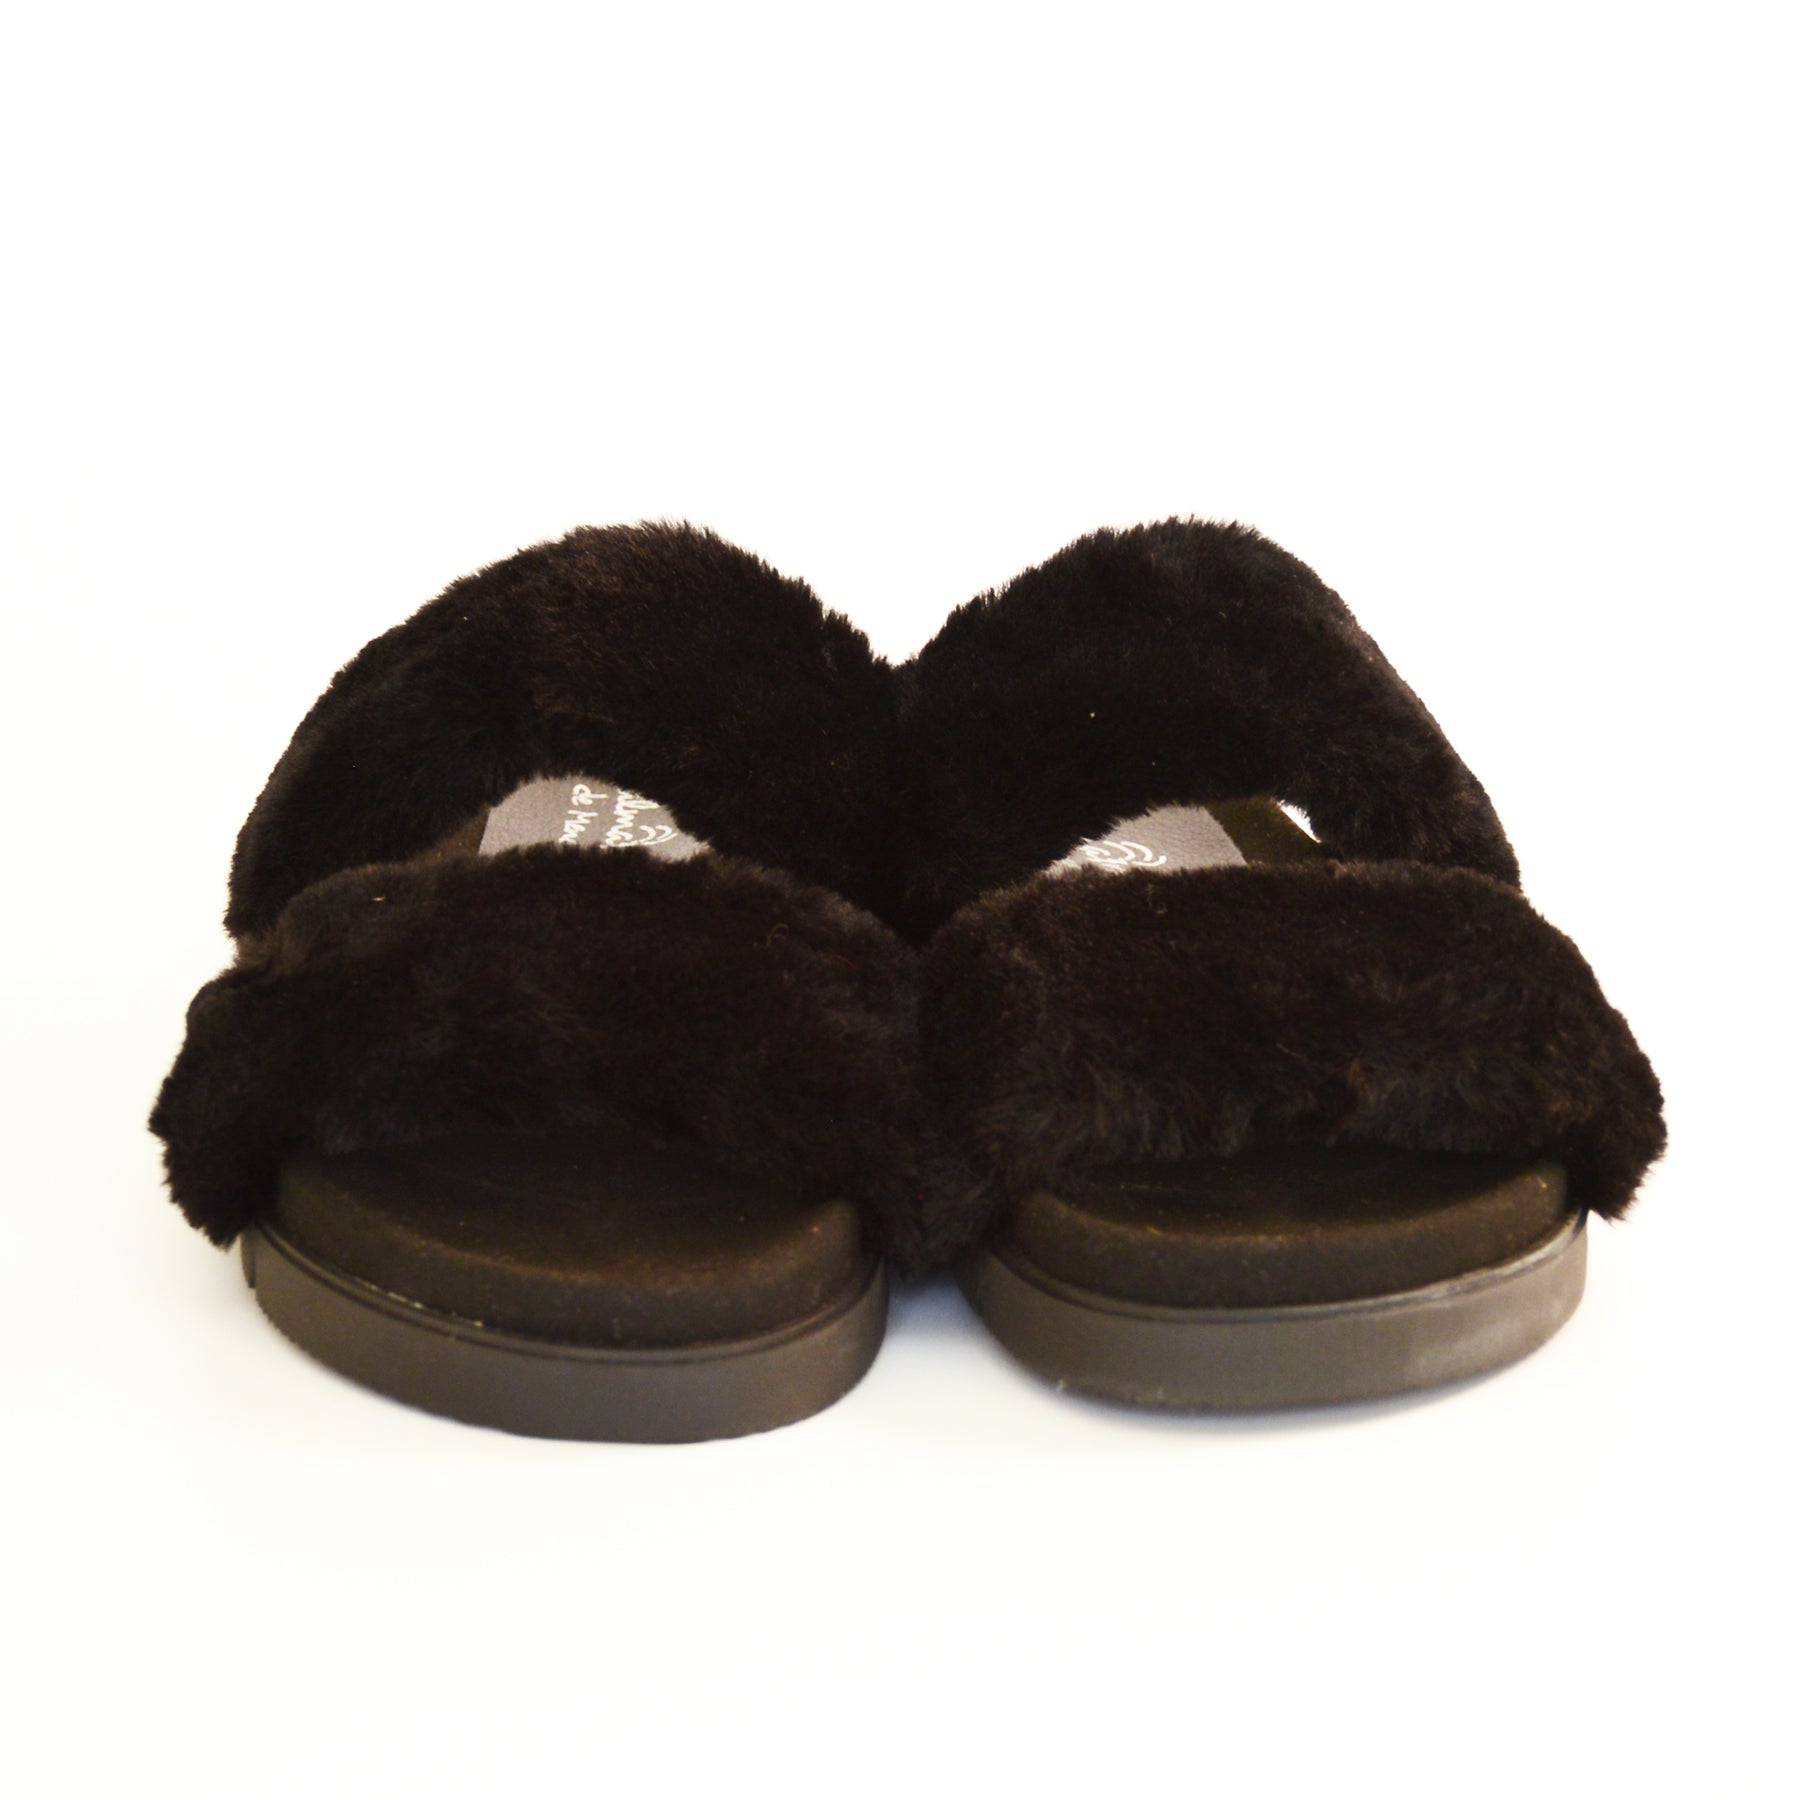 black faux fur fluffy two strap sliders with arch support ergonomic innersole sandals